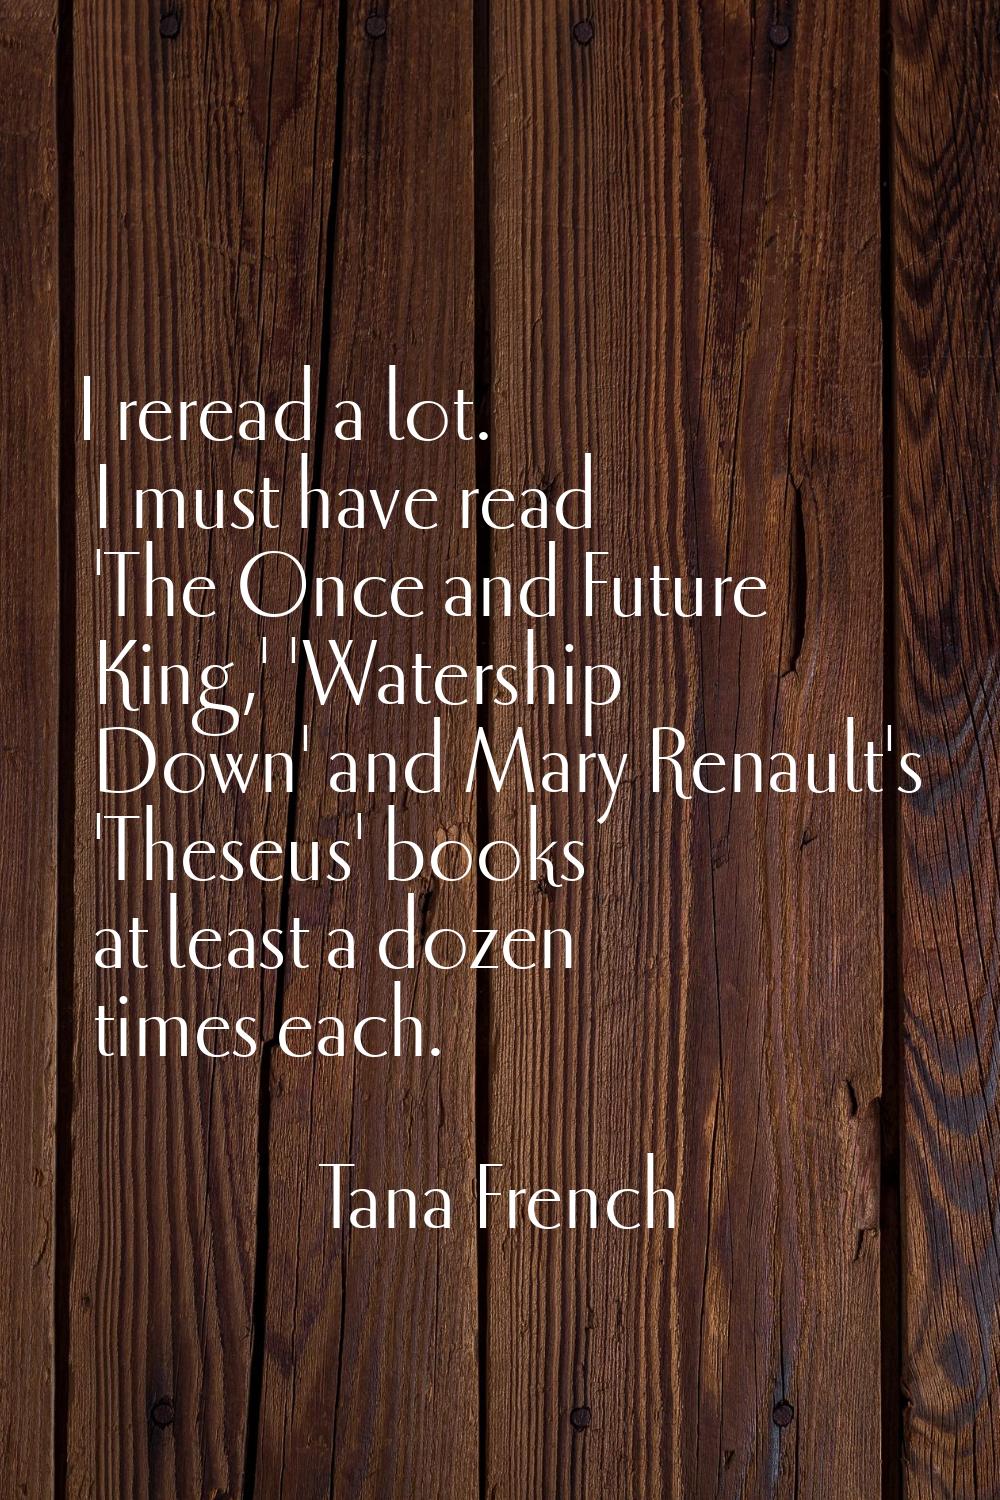 I reread a lot. I must have read 'The Once and Future King,' 'Watership Down' and Mary Renault's 'T